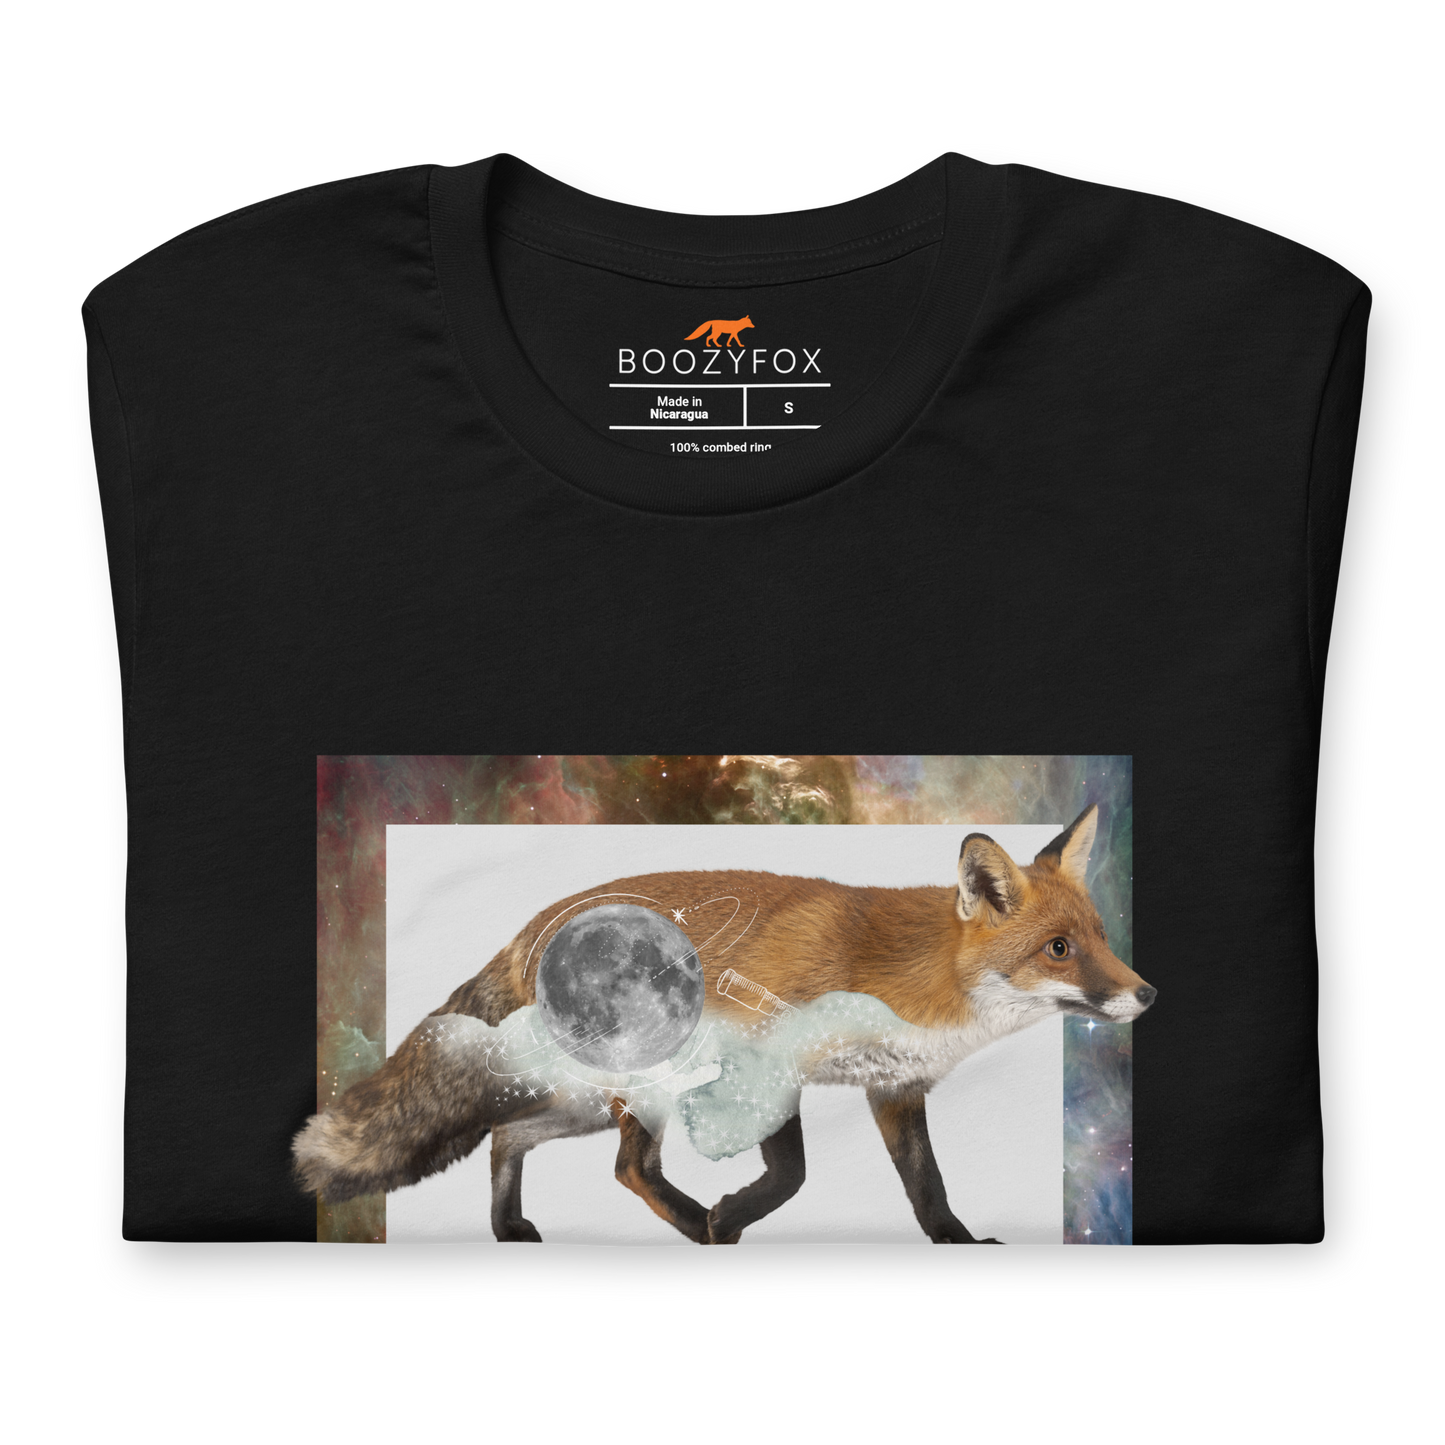 Front details of a Black Premium Fox T-Shirt featuring a stellar Space Fox graphic on the chest - Cool Graphic Fox Tees - Boozy Fox